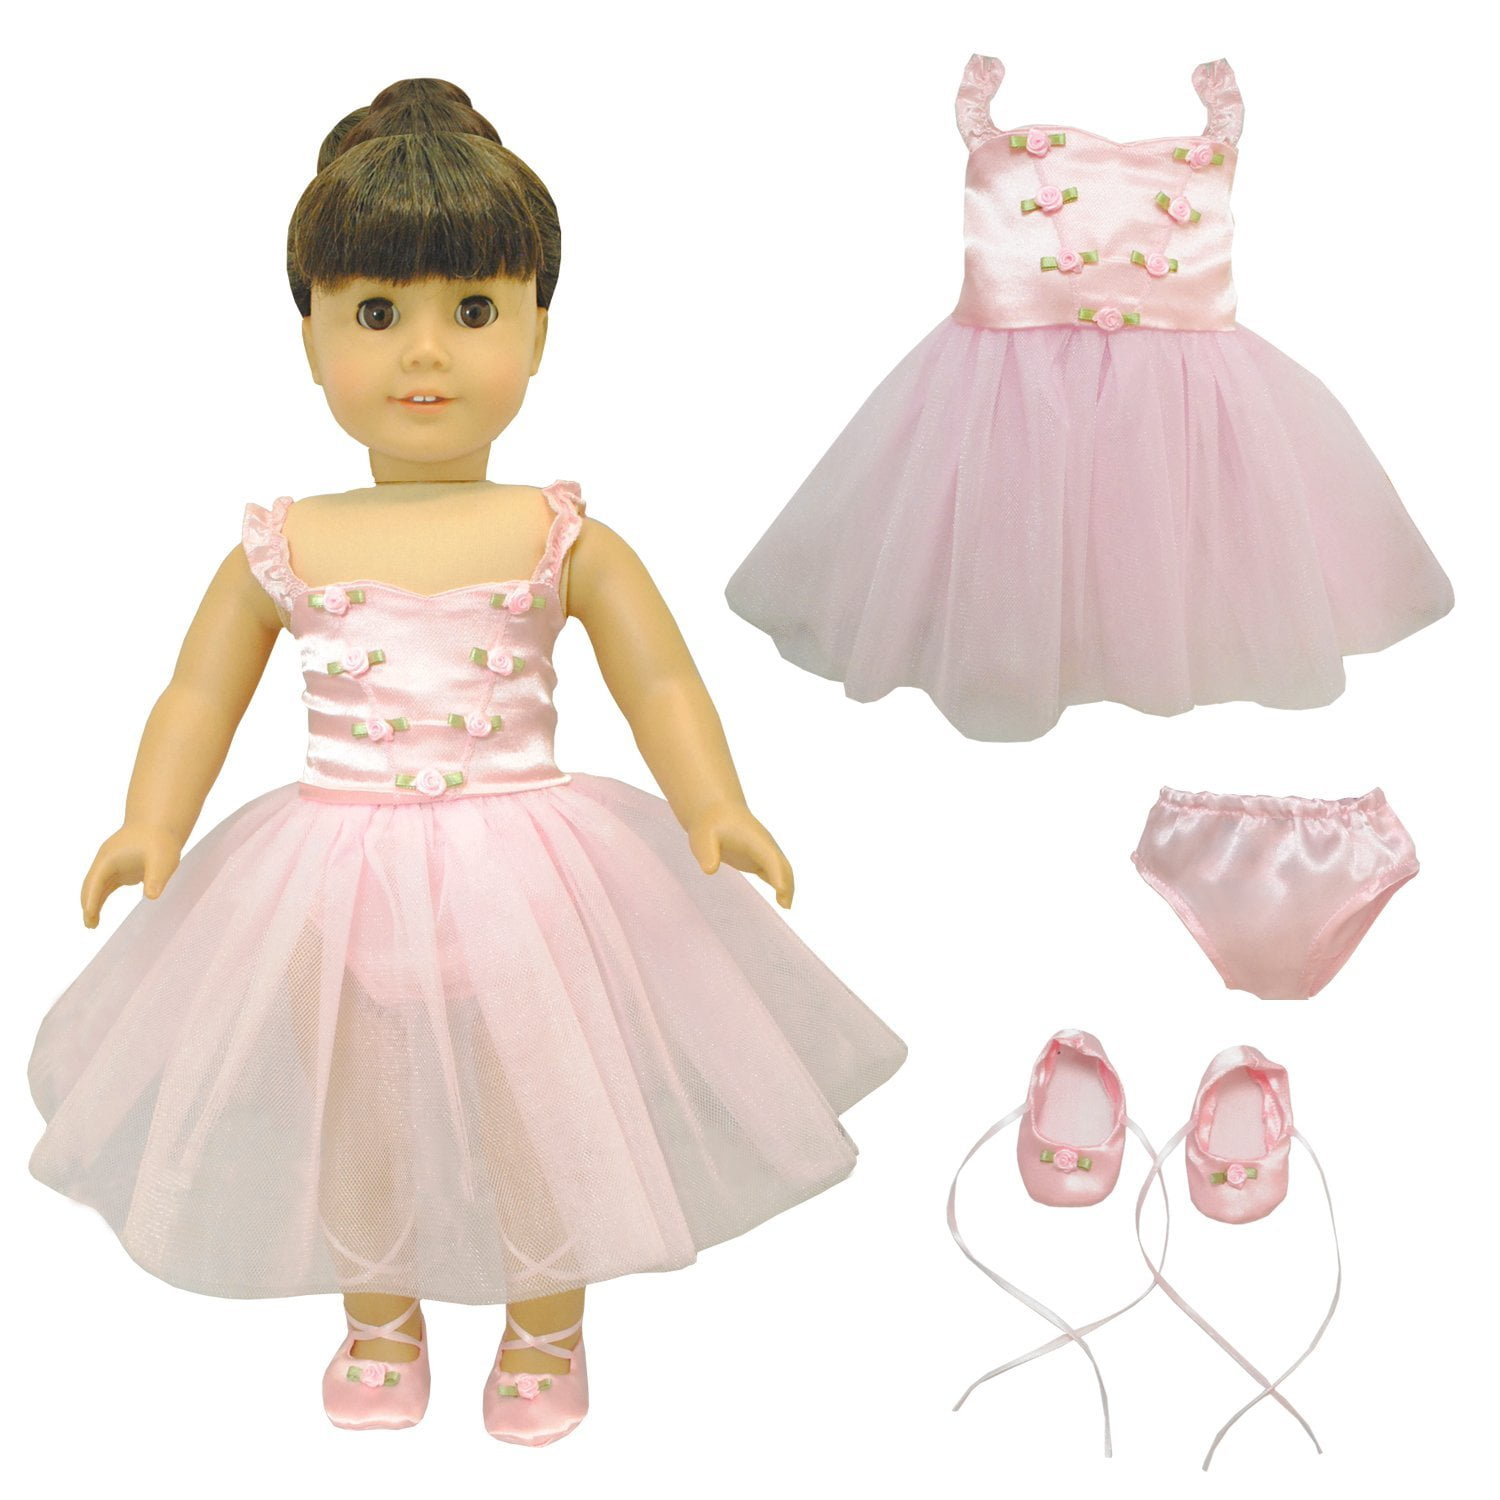 Pink Doll Clothes Ballet Dress Fit For 18 Inch American Girl Dolls Handmade #2